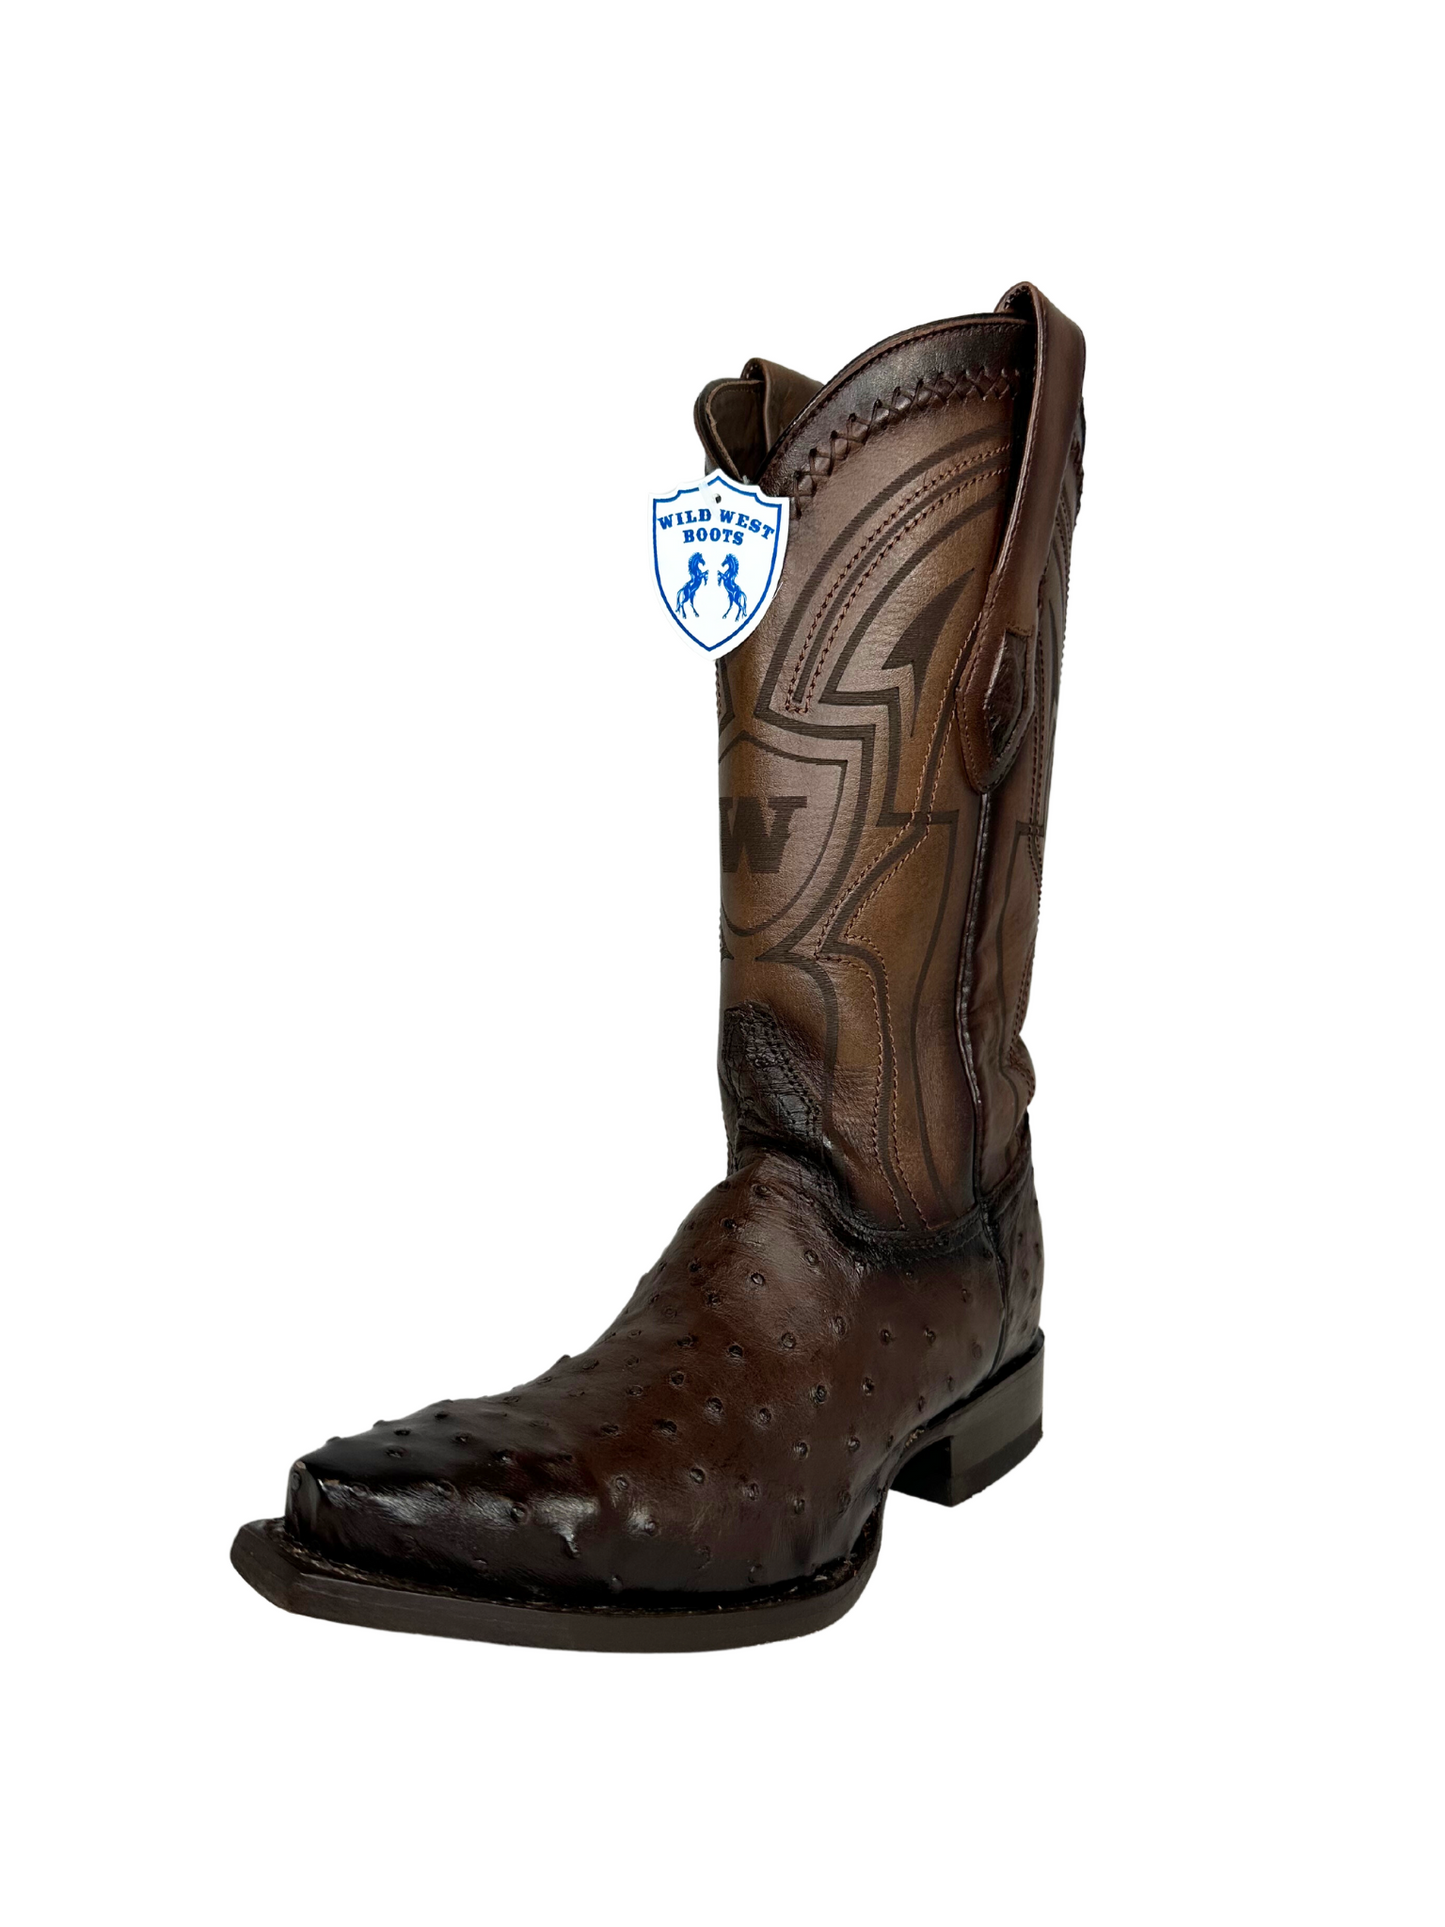 Wild West Faded Brown Genuine Ostrich Snip Toe Boot